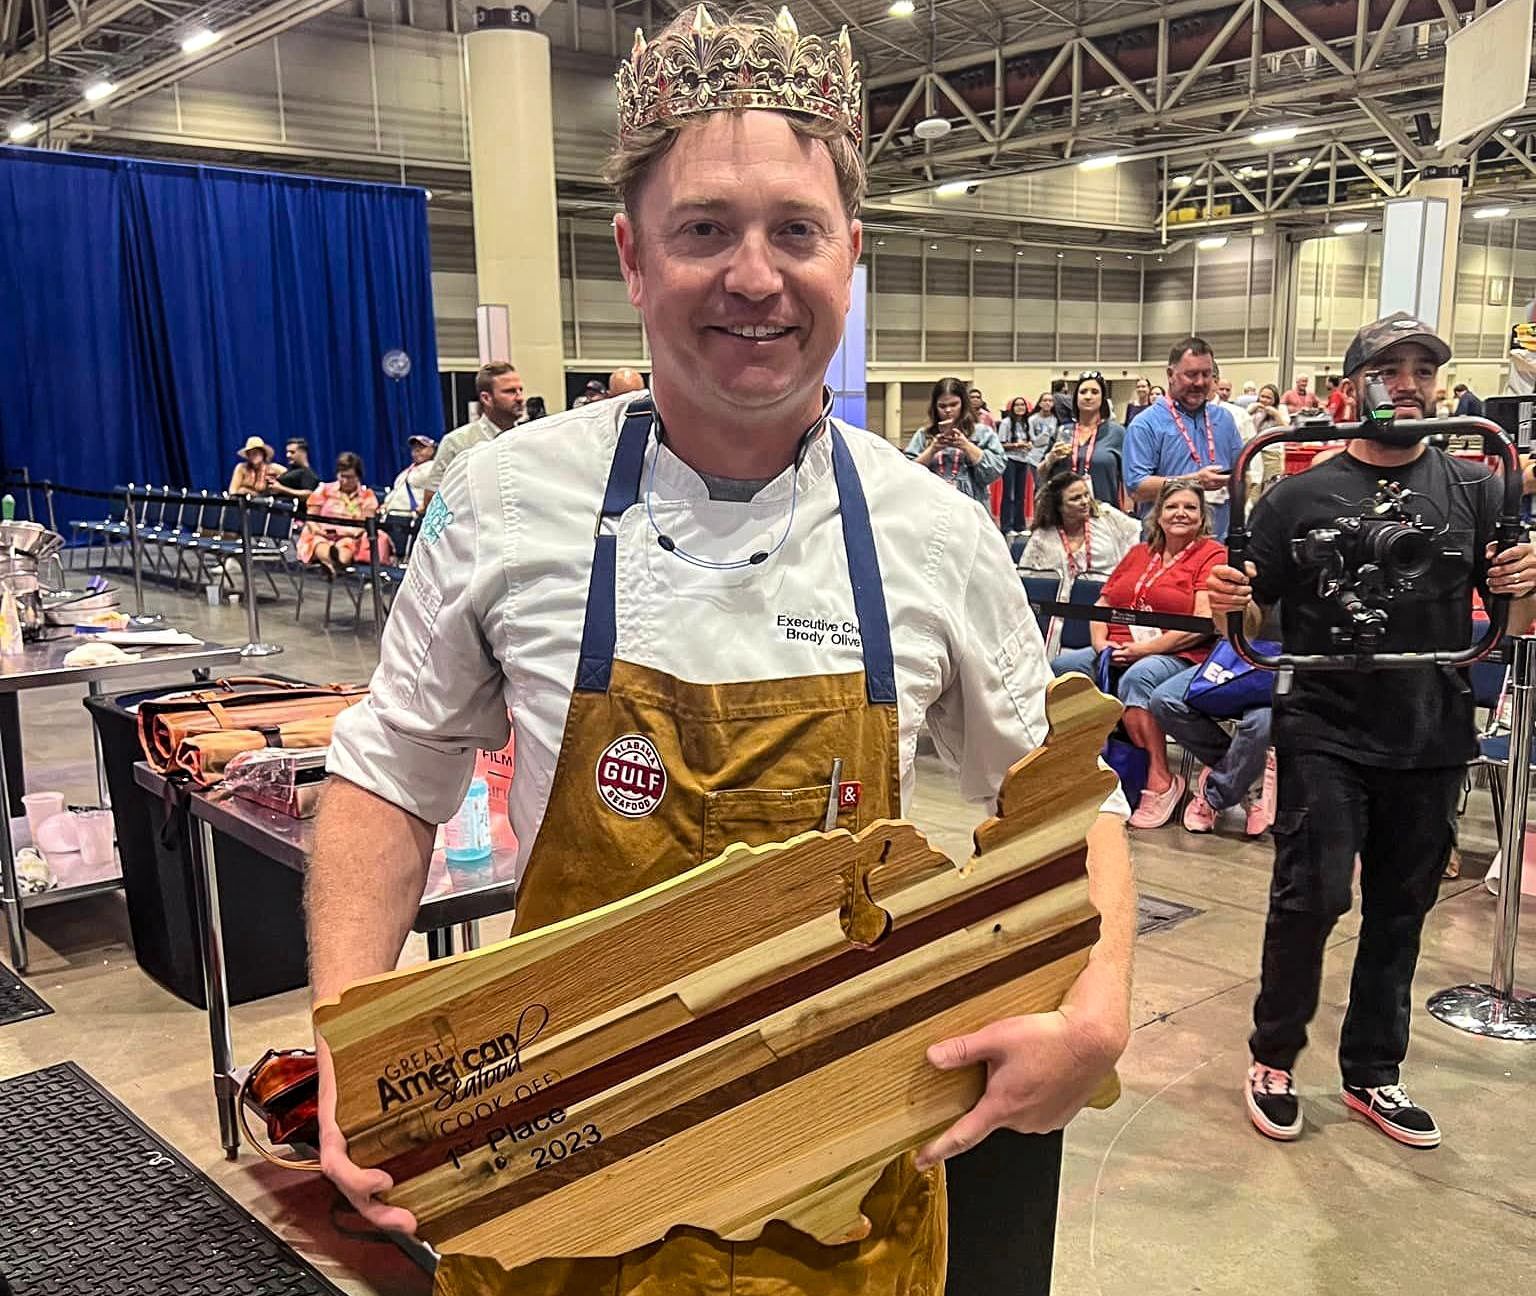 Chef Brody Olive crowned King at the Great American Seafood Cook-Off